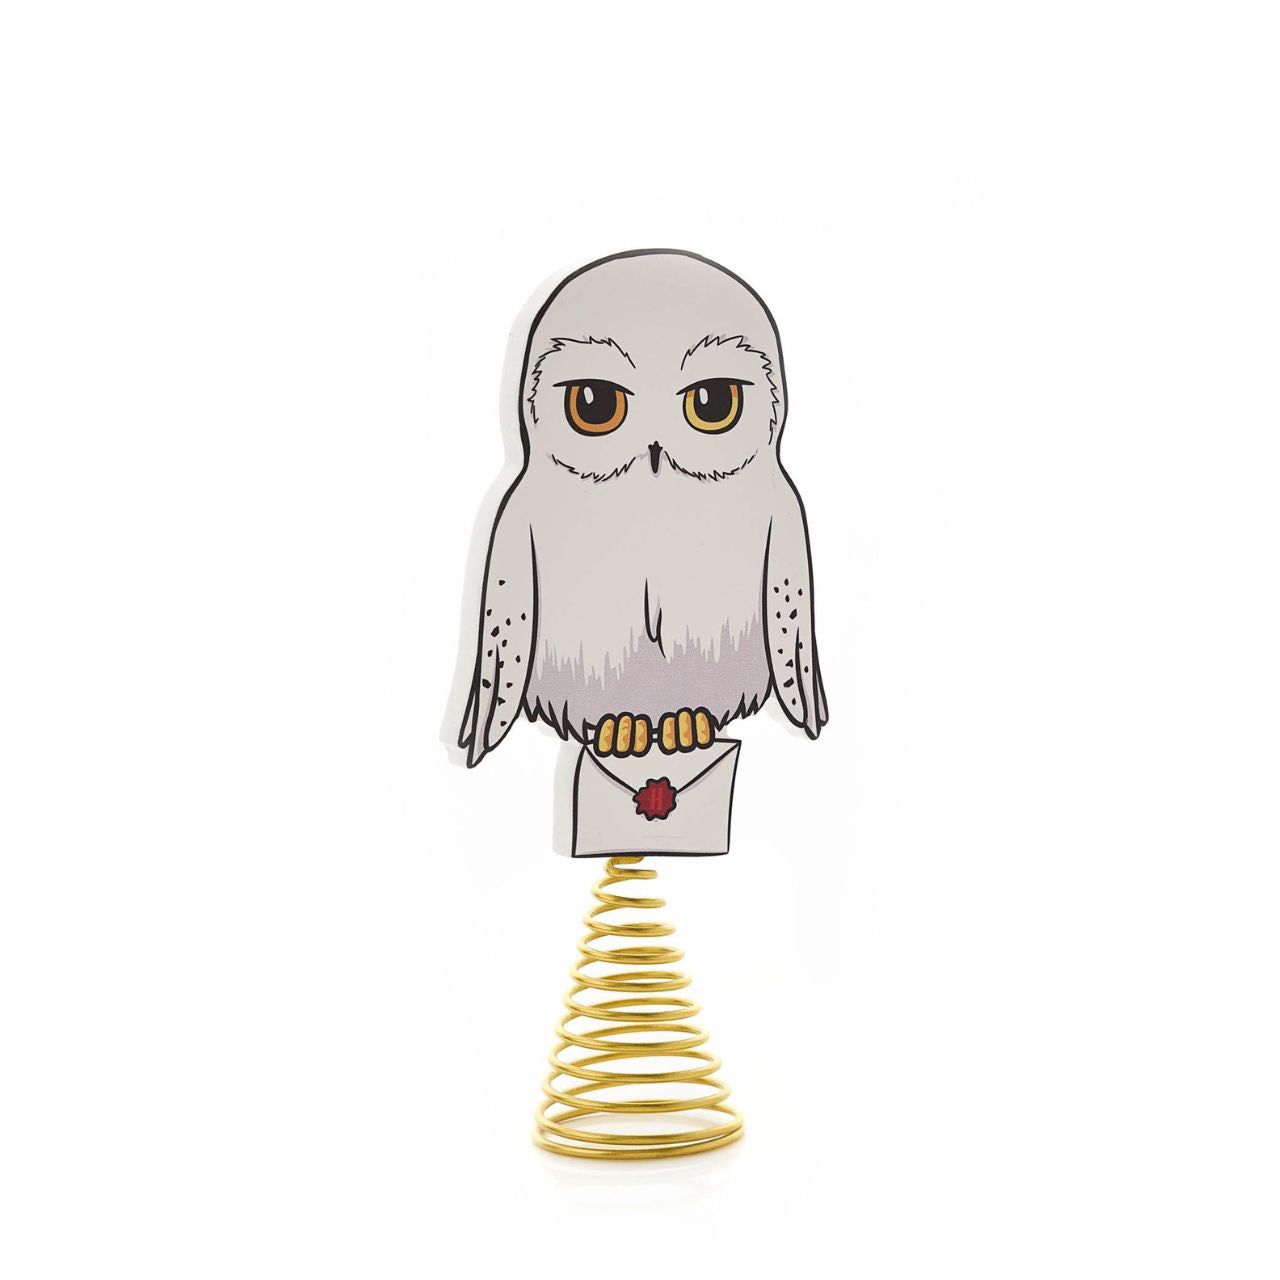 Harry Potter Tree Topper - Hedwig  Add some character to the top of your tree this year by welcoming Hedwig into your festive season. A perfectly magical gift for any Harry Potter fans in your life.